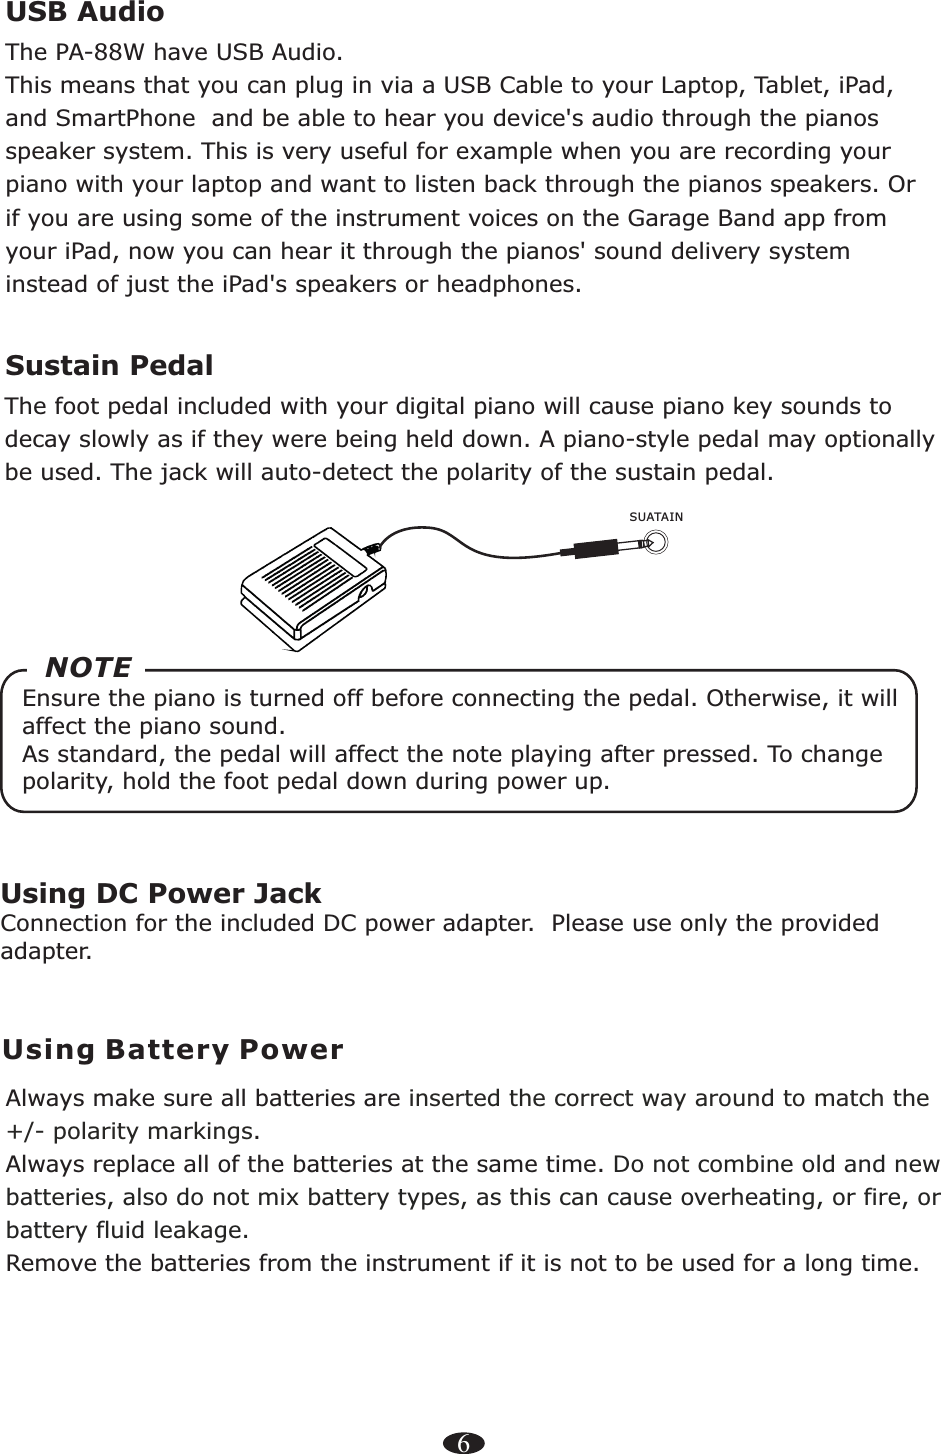 Using DC Power JackConnection for the included DC power adapter.  Please use only the provided adapter.6Using Battery PowerAlways make sure all batteries are .Always replace   at the same time. Remove the batteries from the instrument if it is not to be used for a long time.inserted the correct way around to match the +/- polarity markingsall of the batteries Do not combine old and new batteries, also do not mix battery types, as this can cause overheating, or fire, or battery fluid leakage.Sustain Pedal    The foot pedal included with your digital piano will cause piano key sounds to decay slowly as if they were being held down. A piano-style pedal may optionally be used. The jack will auto-detect the polarity of the sustain pedal. SUATAINEnsure the piano is turned off before connecting the pedal. Otherwise, it will affect the piano sound.  As standard, the pedal will affect the note playing after pressed. To change polarity, hold the foot pedal down during power up.NOTEUSB Audio    The PA-88W have USB Audio.This means that you can plug in via a USB Cable to your Laptop, Tablet, iPad, and SmartPhone  and be able to hear you device&apos;s audio through the pianos speaker system. This is very useful for example when you are recording your piano with your laptop and want to listen back through the pianos speakers. Or if you are using some of the instrument voices on the Garage Band app from your iPad, now you can hear it through the pianos&apos; sound delivery system instead of just the iPad&apos;s speakers or headphones. 